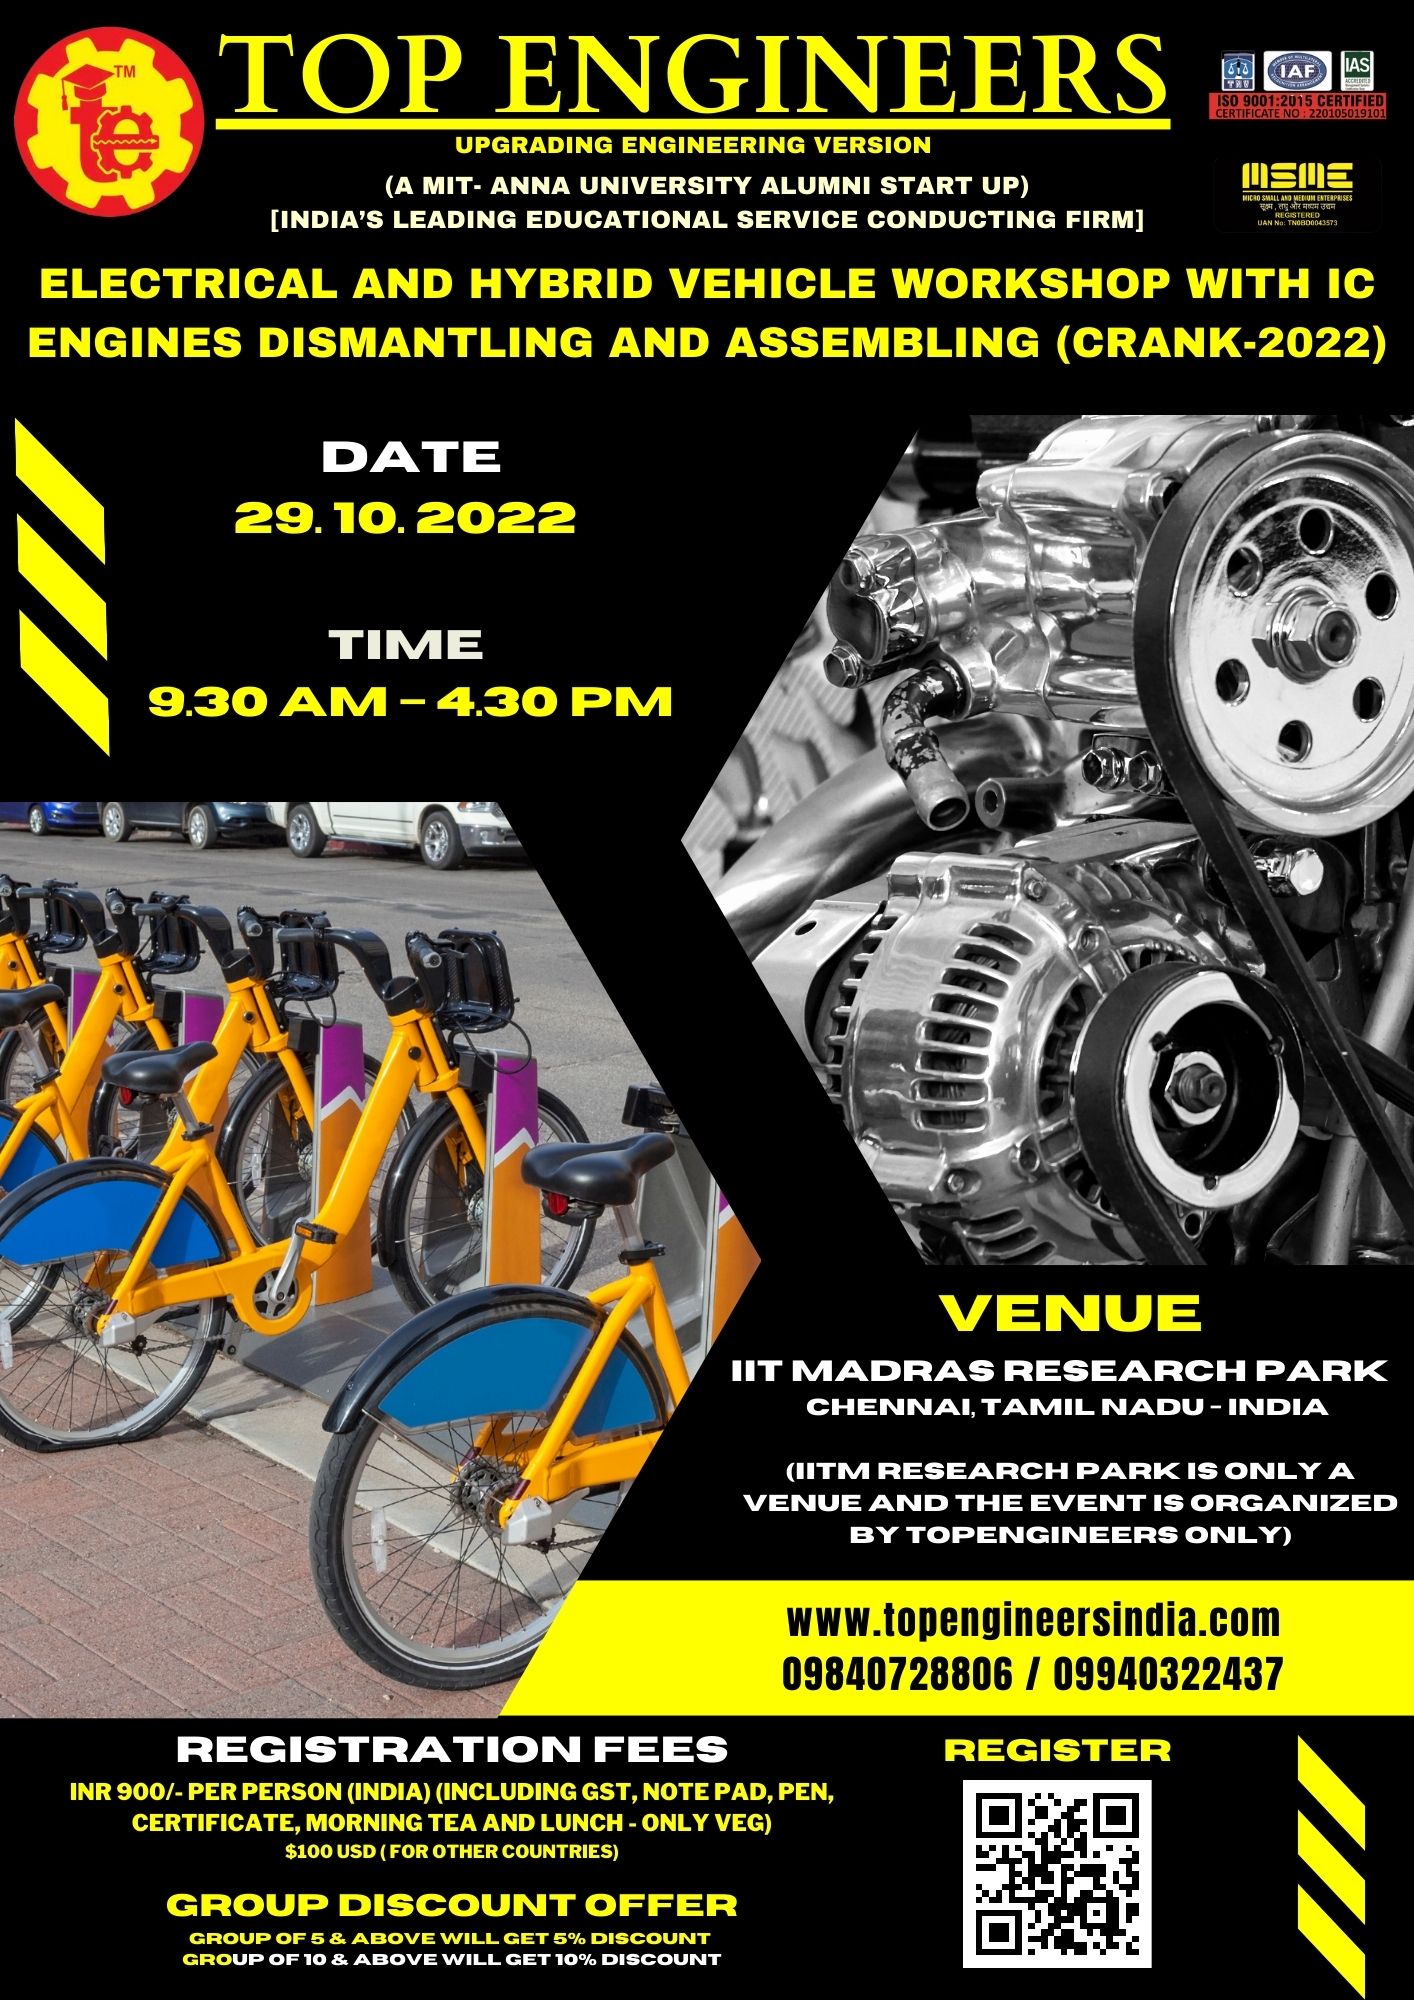 Electrical and Hybrid Vehicle Workshop with Ic Engines Dismantling and Assembling (Crank-2022)